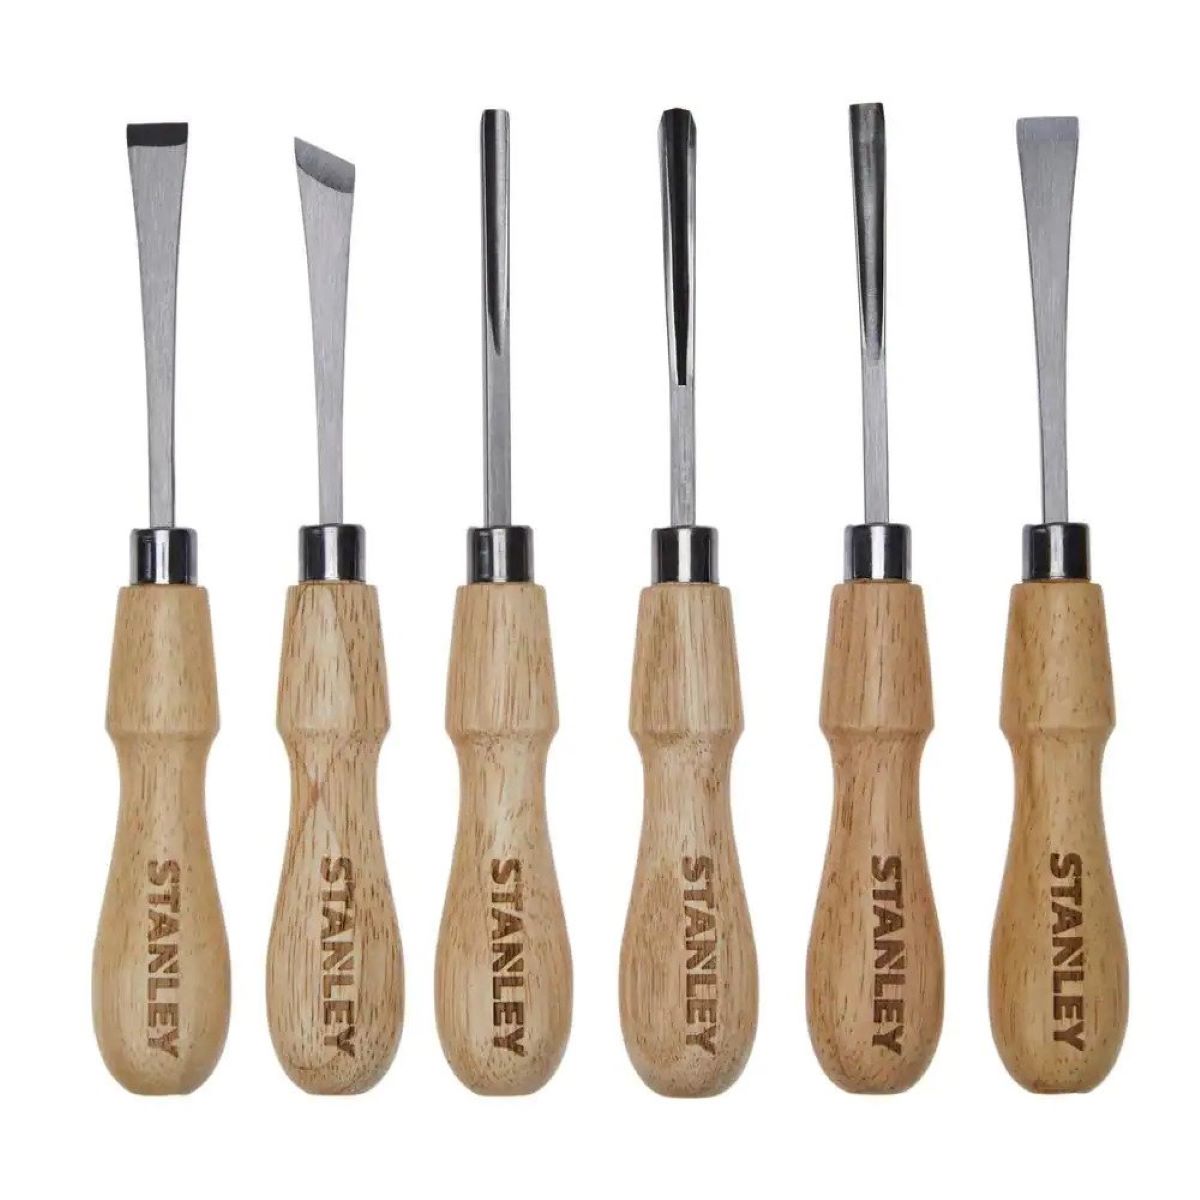 14 Amazing Wood Carving Hand Tools for 2023